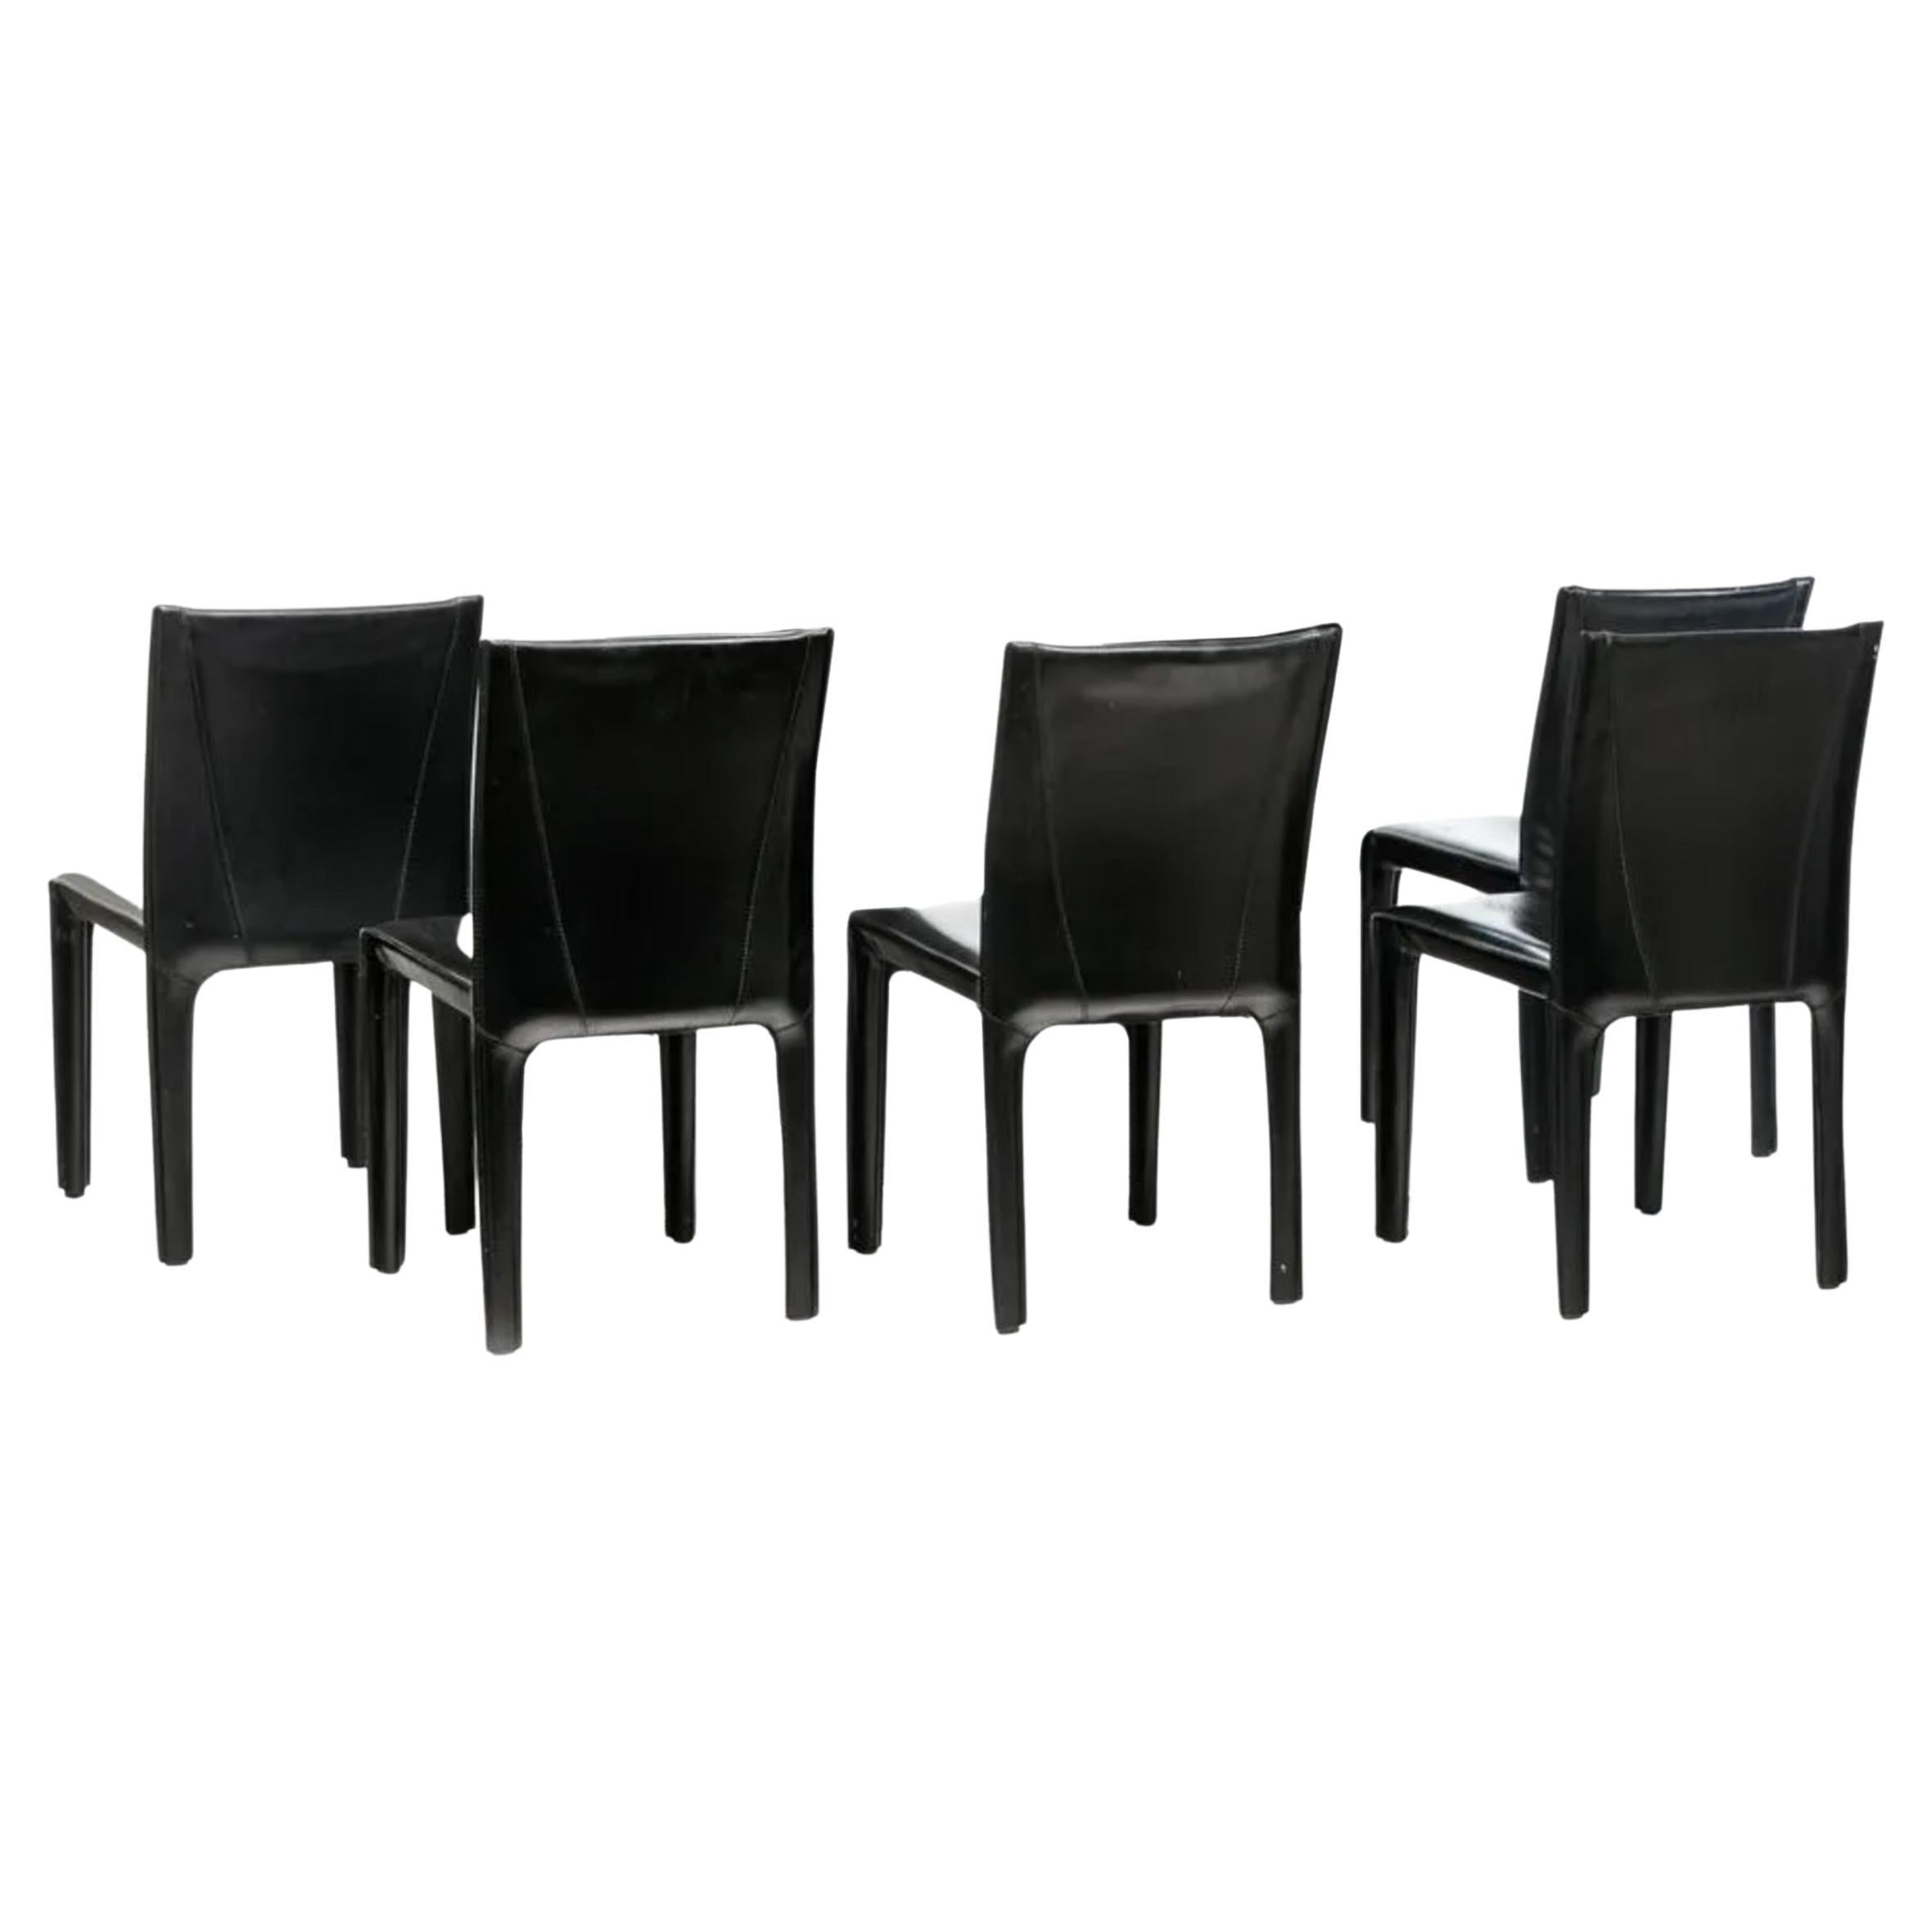 Set of 5 black leather covered dining chairs in good vintage condition. Labeled Arper - Made in Italy. Located In Brooklyn NYC


Dimensions:  19